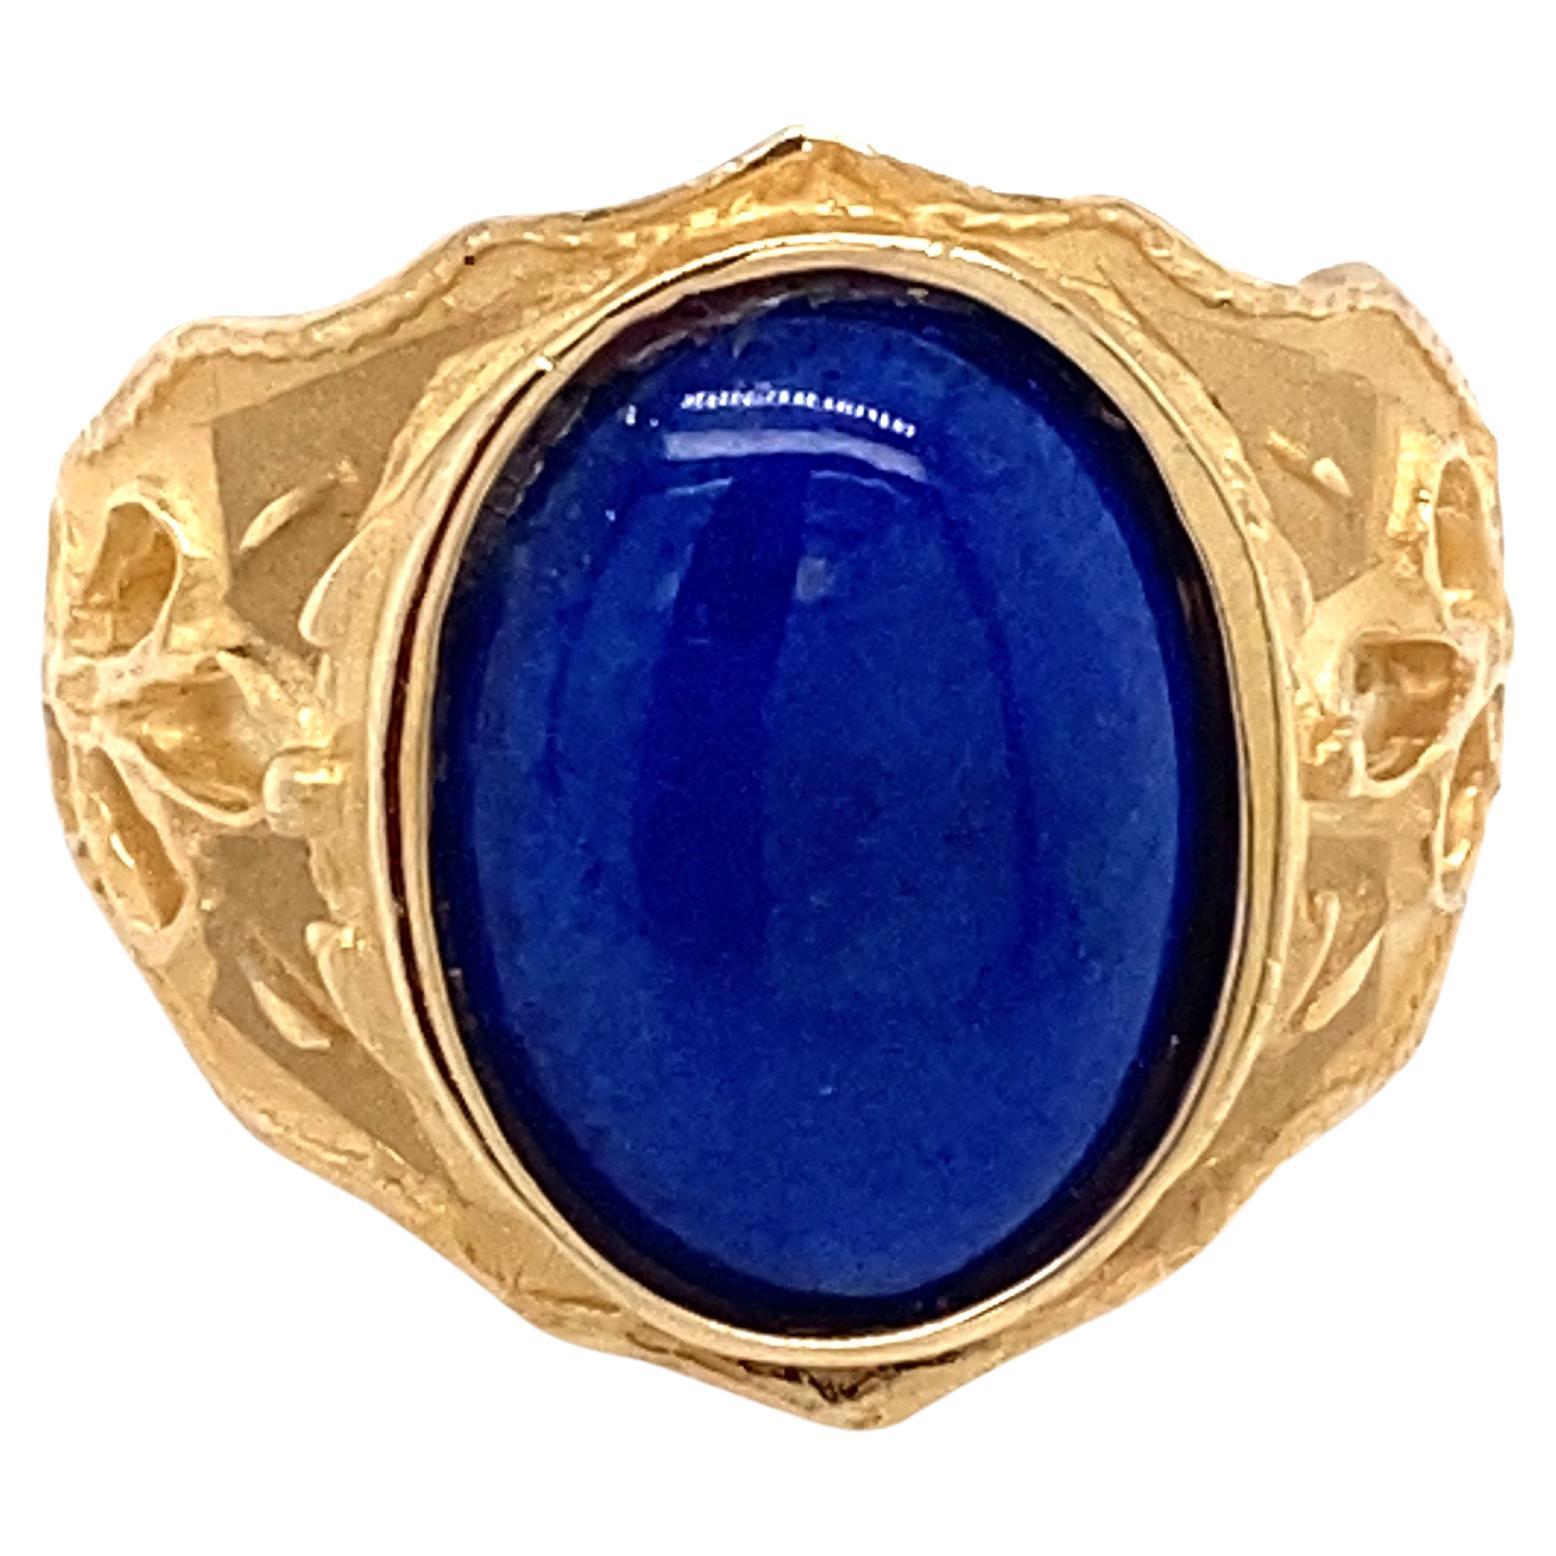 circa 1960s Oval Lapis Lazuli Ring with Carved Floral Motif in 14K Gold